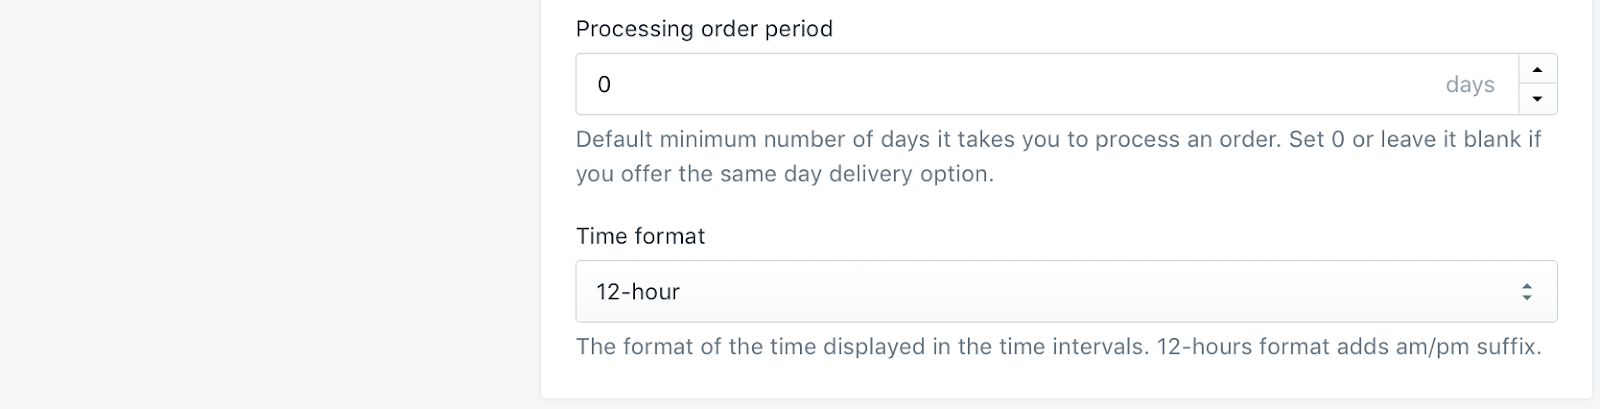 How to Set up and Configure the Delivery Date & Time Suite on Shopify | MageWorx Shopify Blog